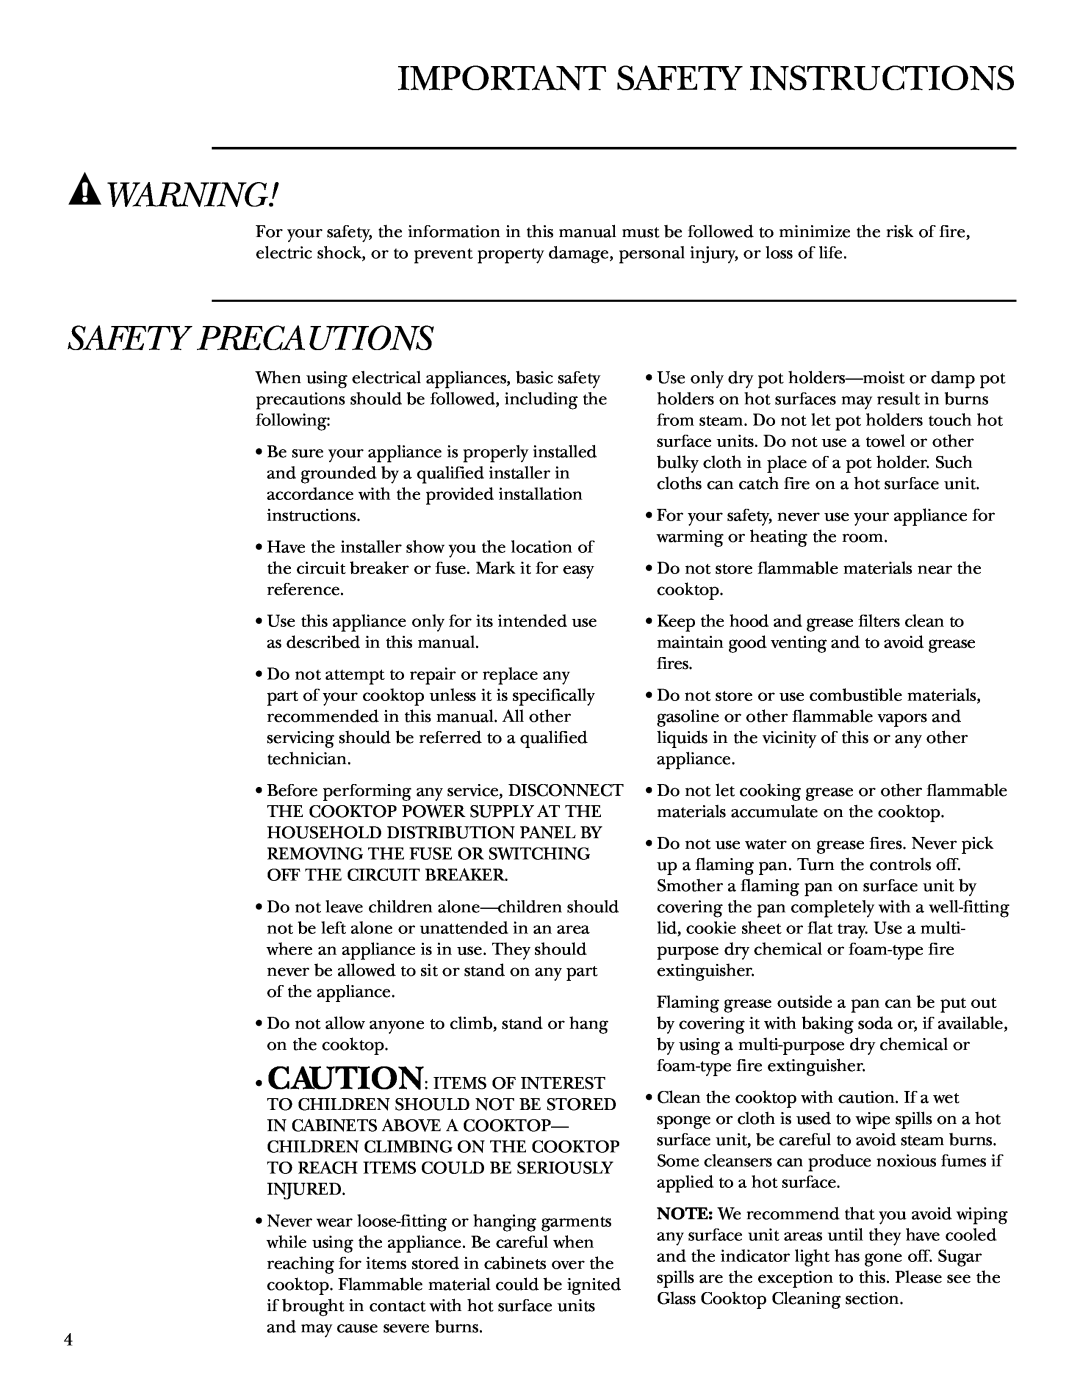 GE ZEU769 owner manual Important Safety Instructions, Safety Precautions 